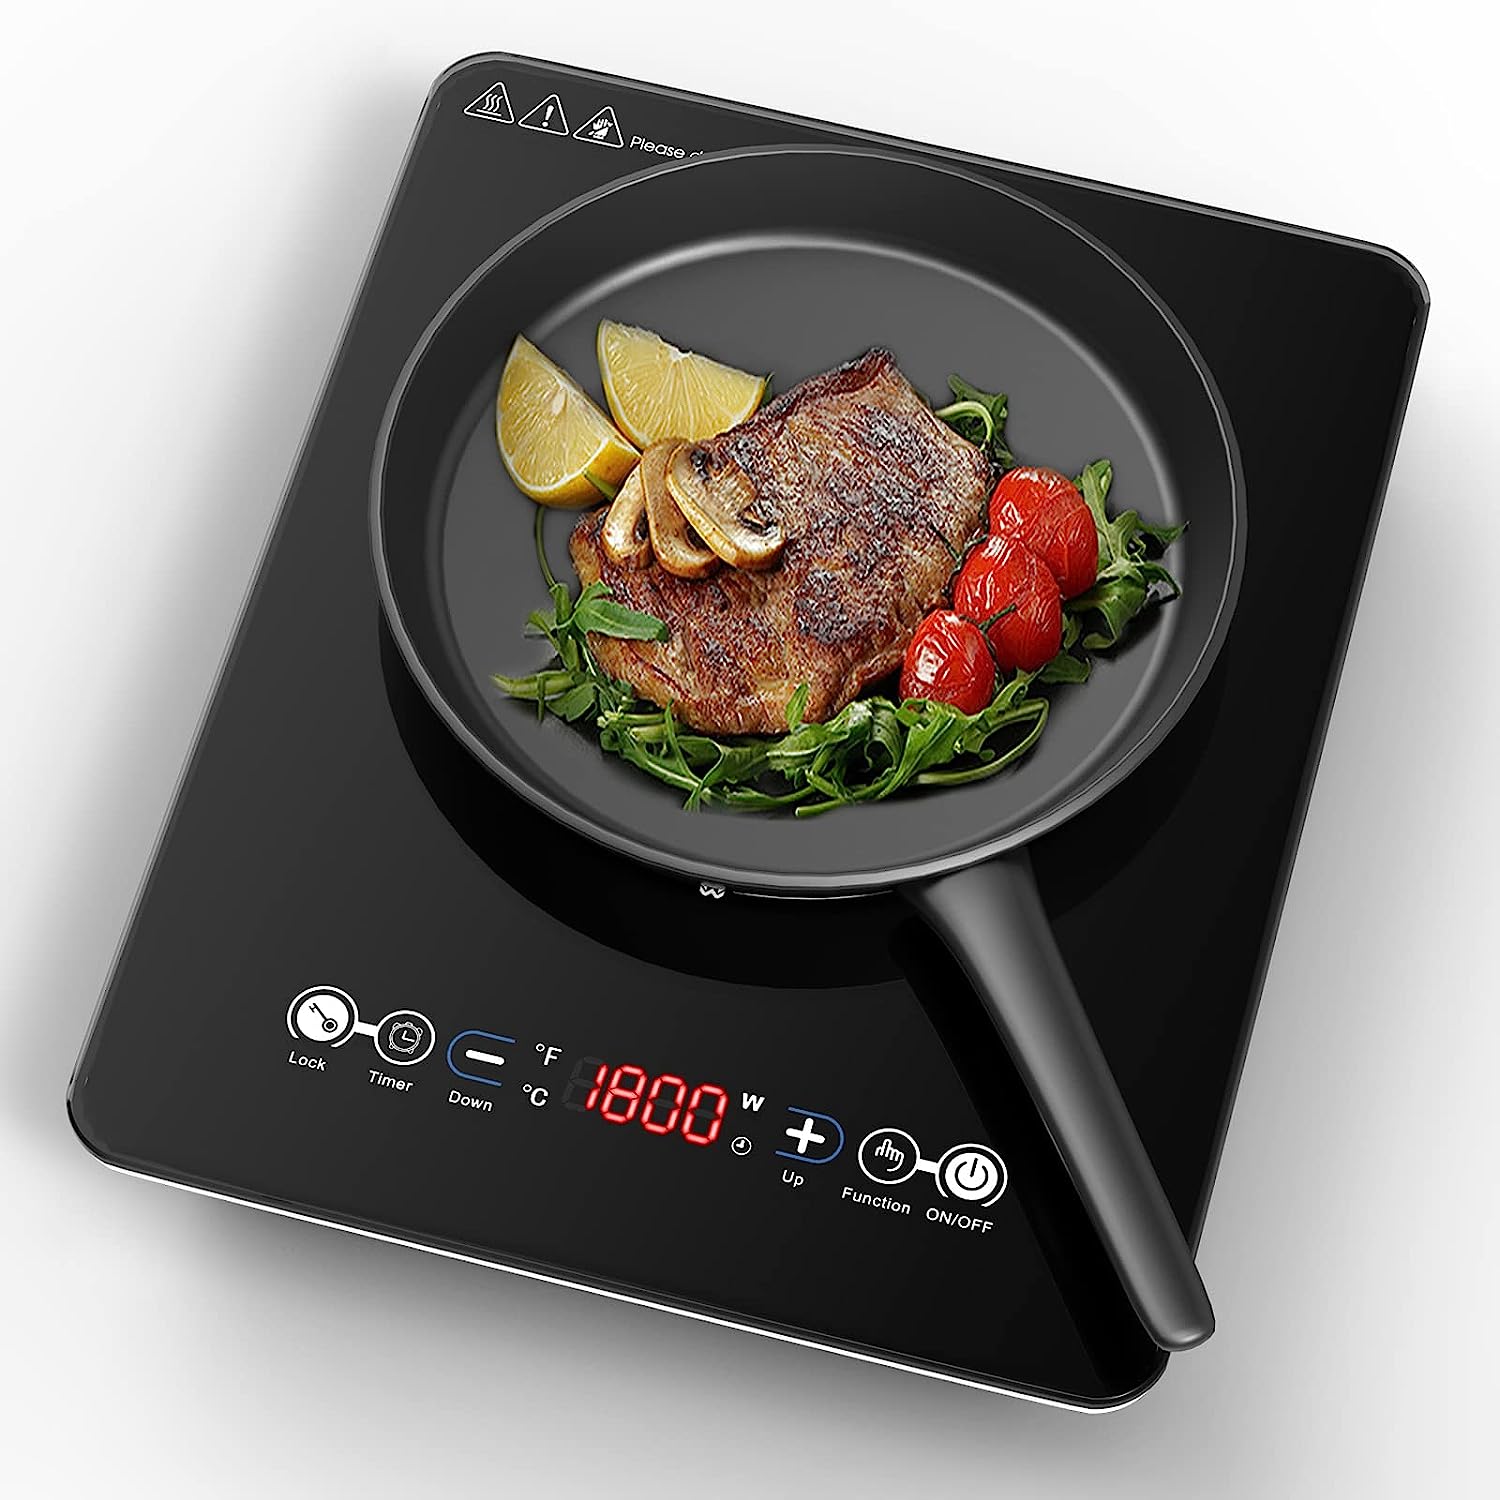 VBGK Portable Induction Cooktop With Ultra Thin Body, [...]